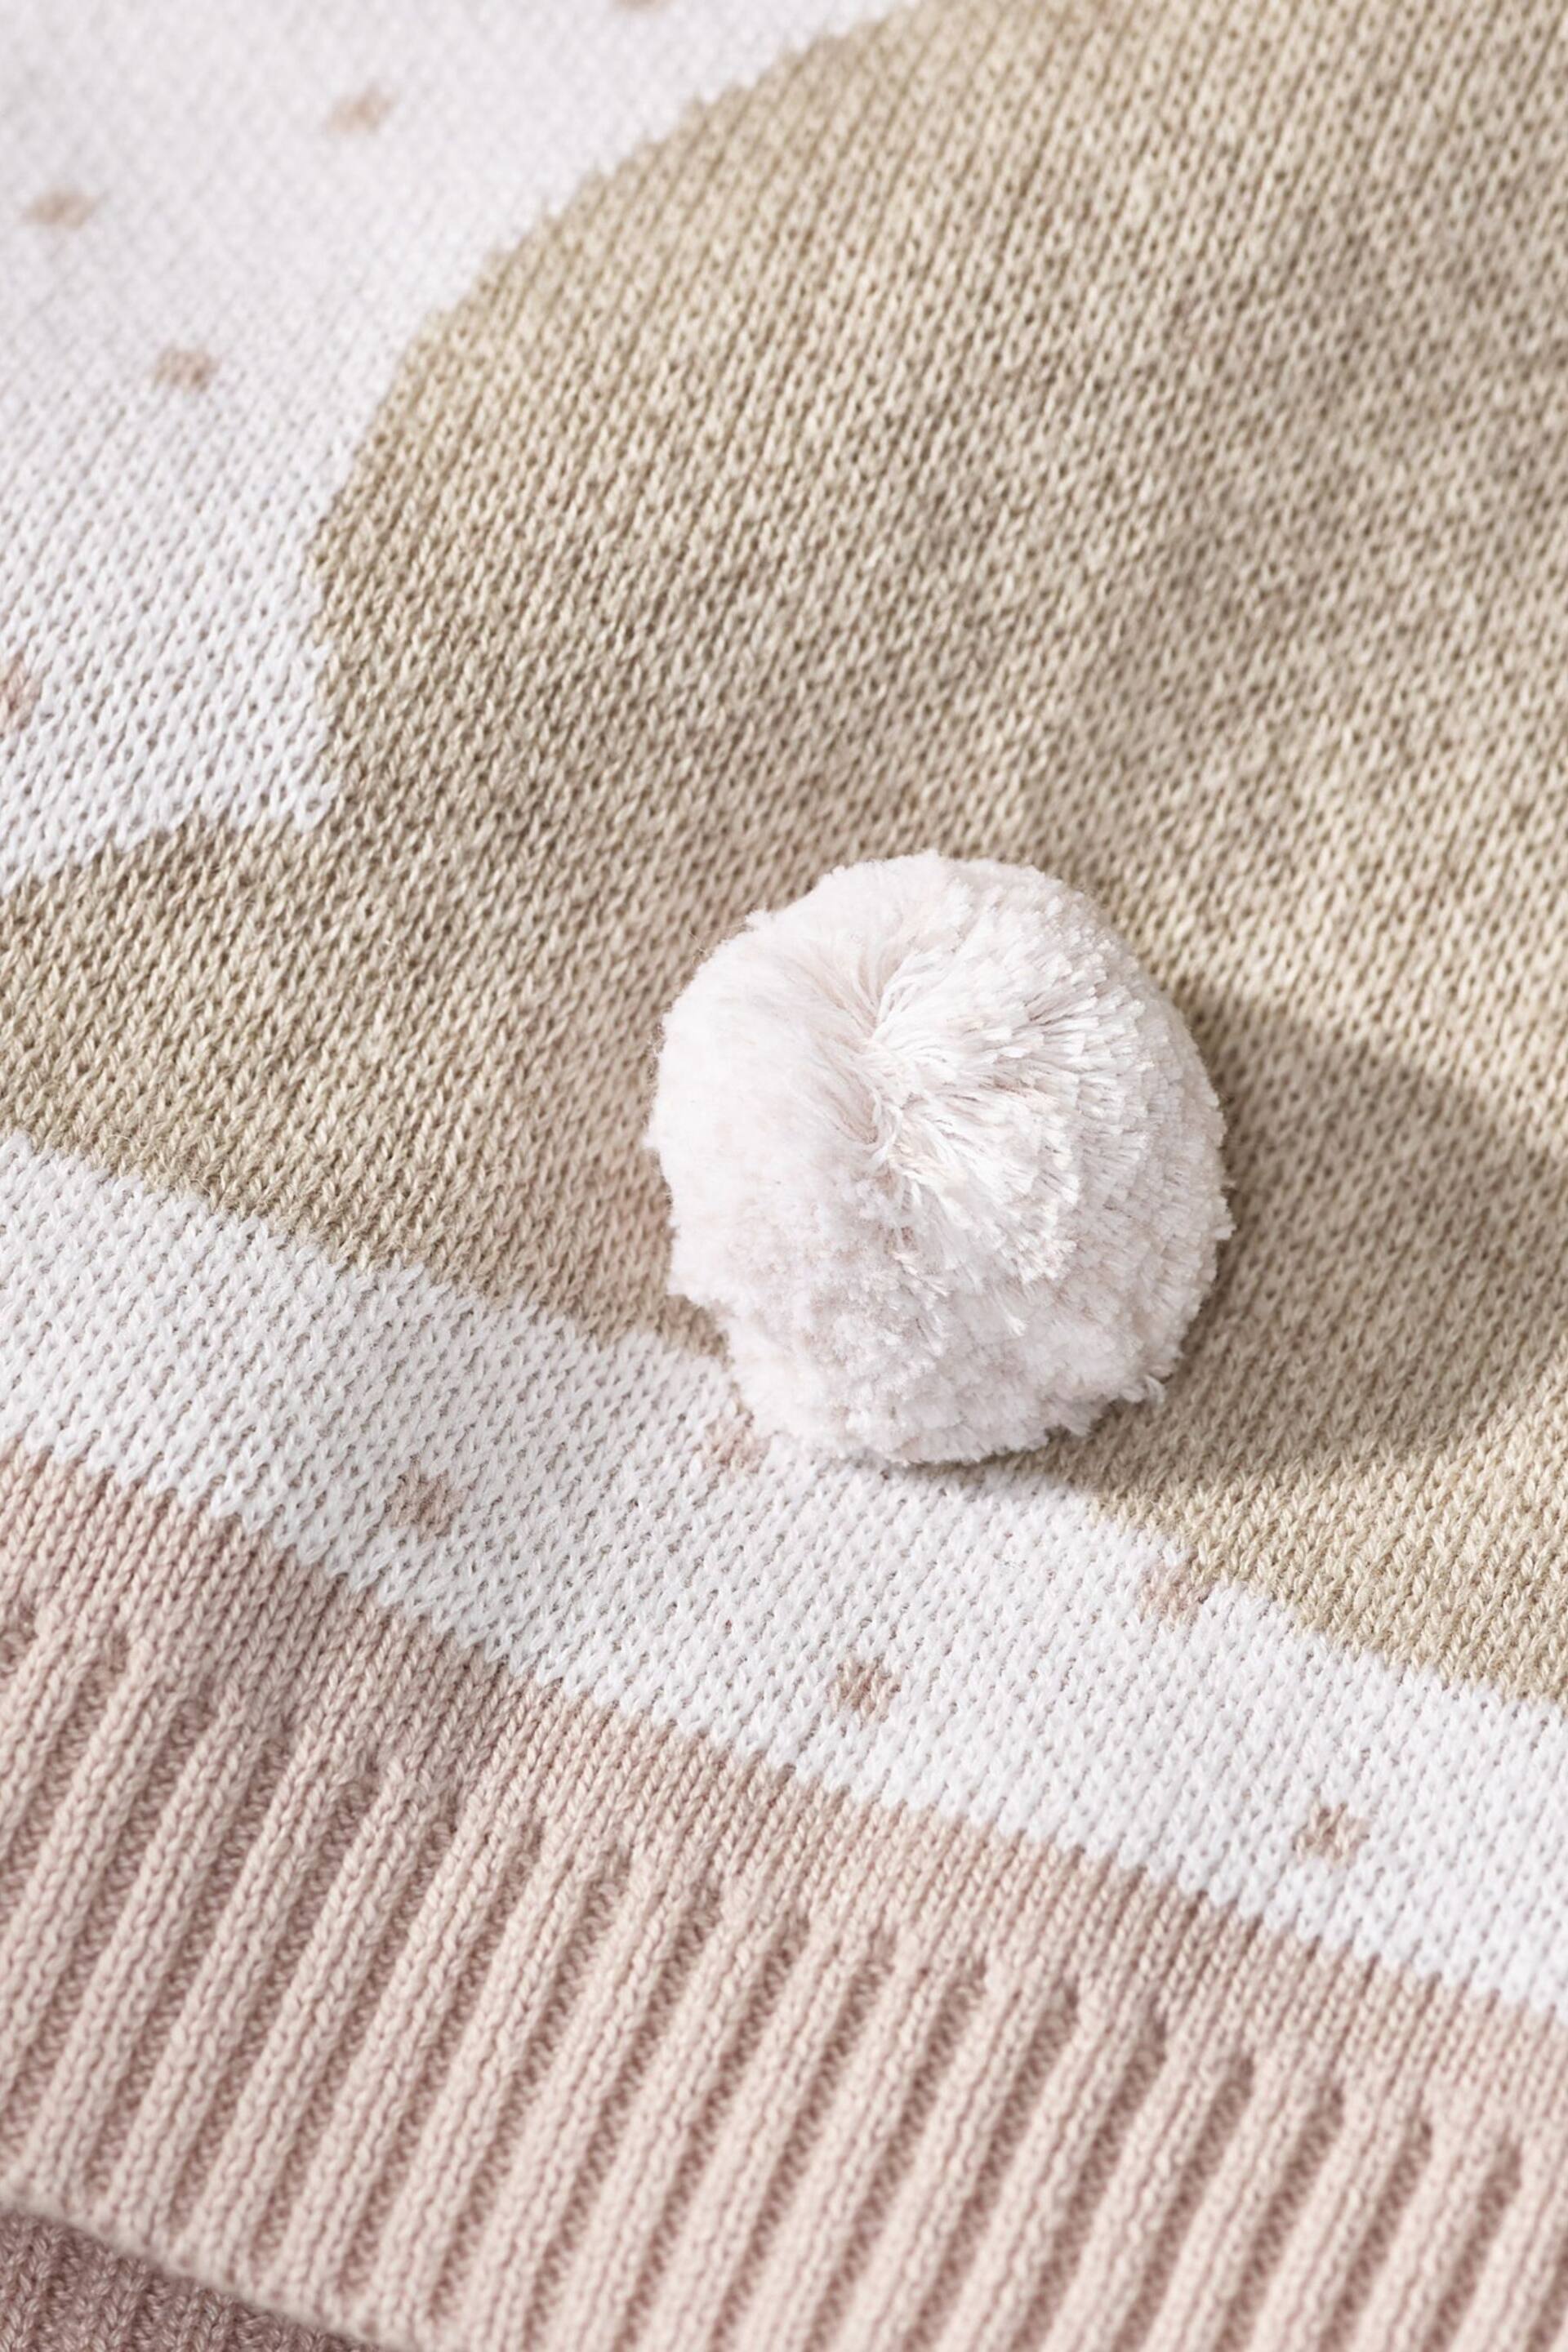 The White Company Pink Pom Bunny Baby Blanket - Image 2 of 3